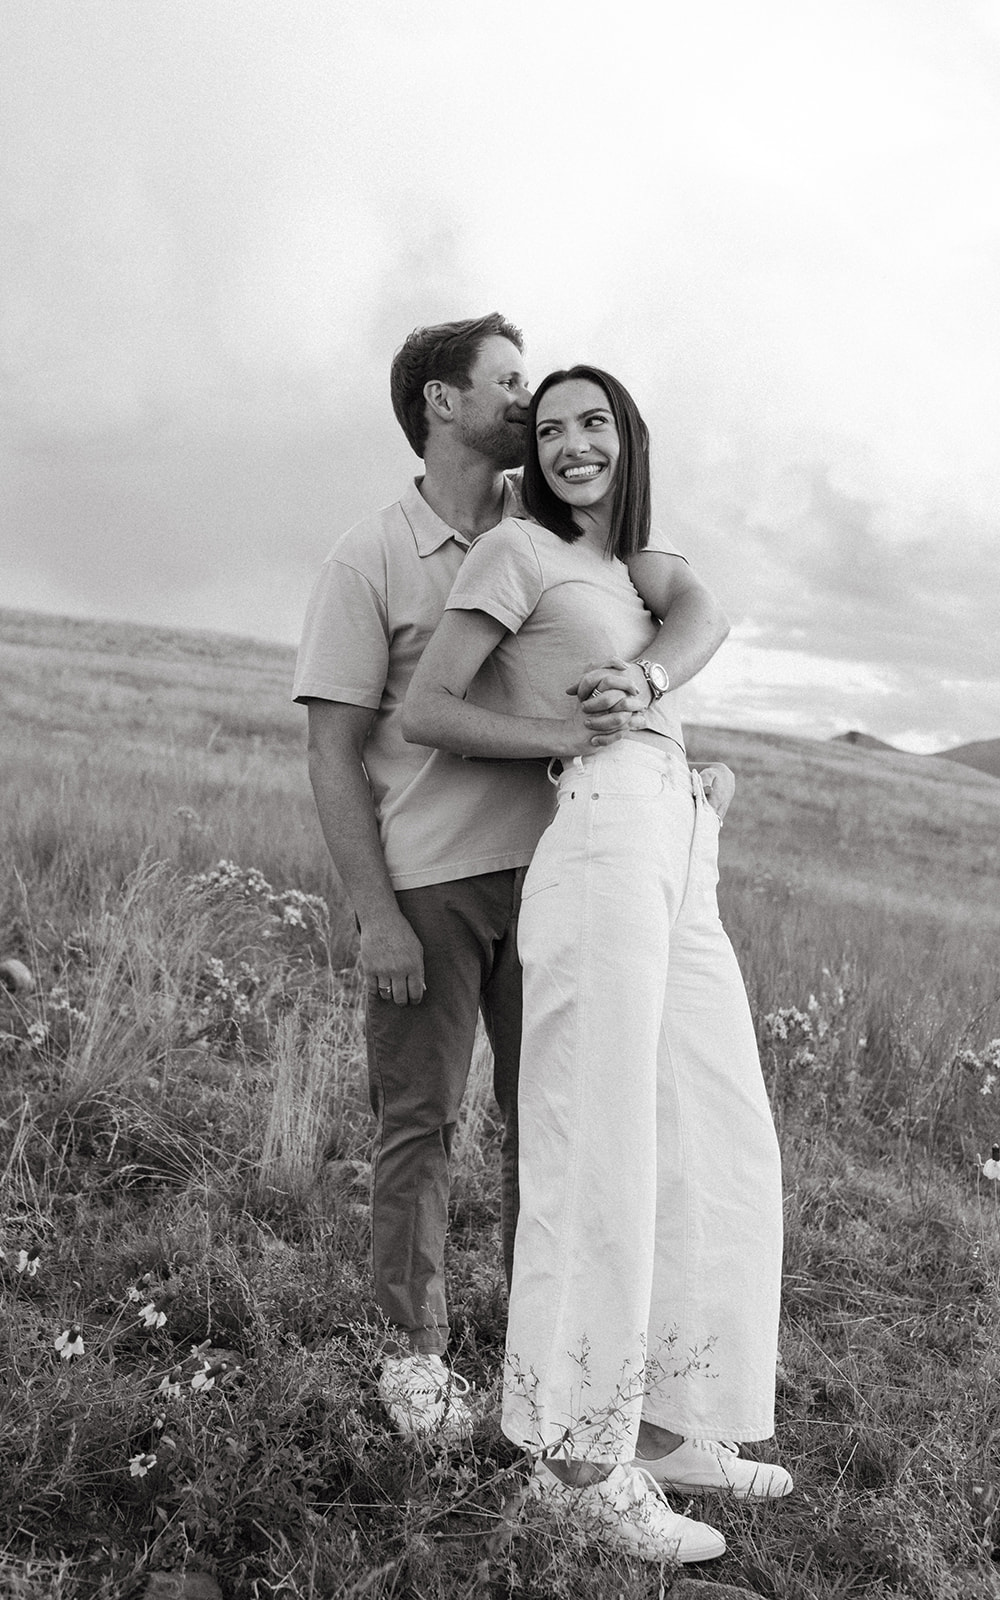 A modern, fashion-forward engagement couple embraces while smiling for a portrait in a wildflower meadow in Colorado